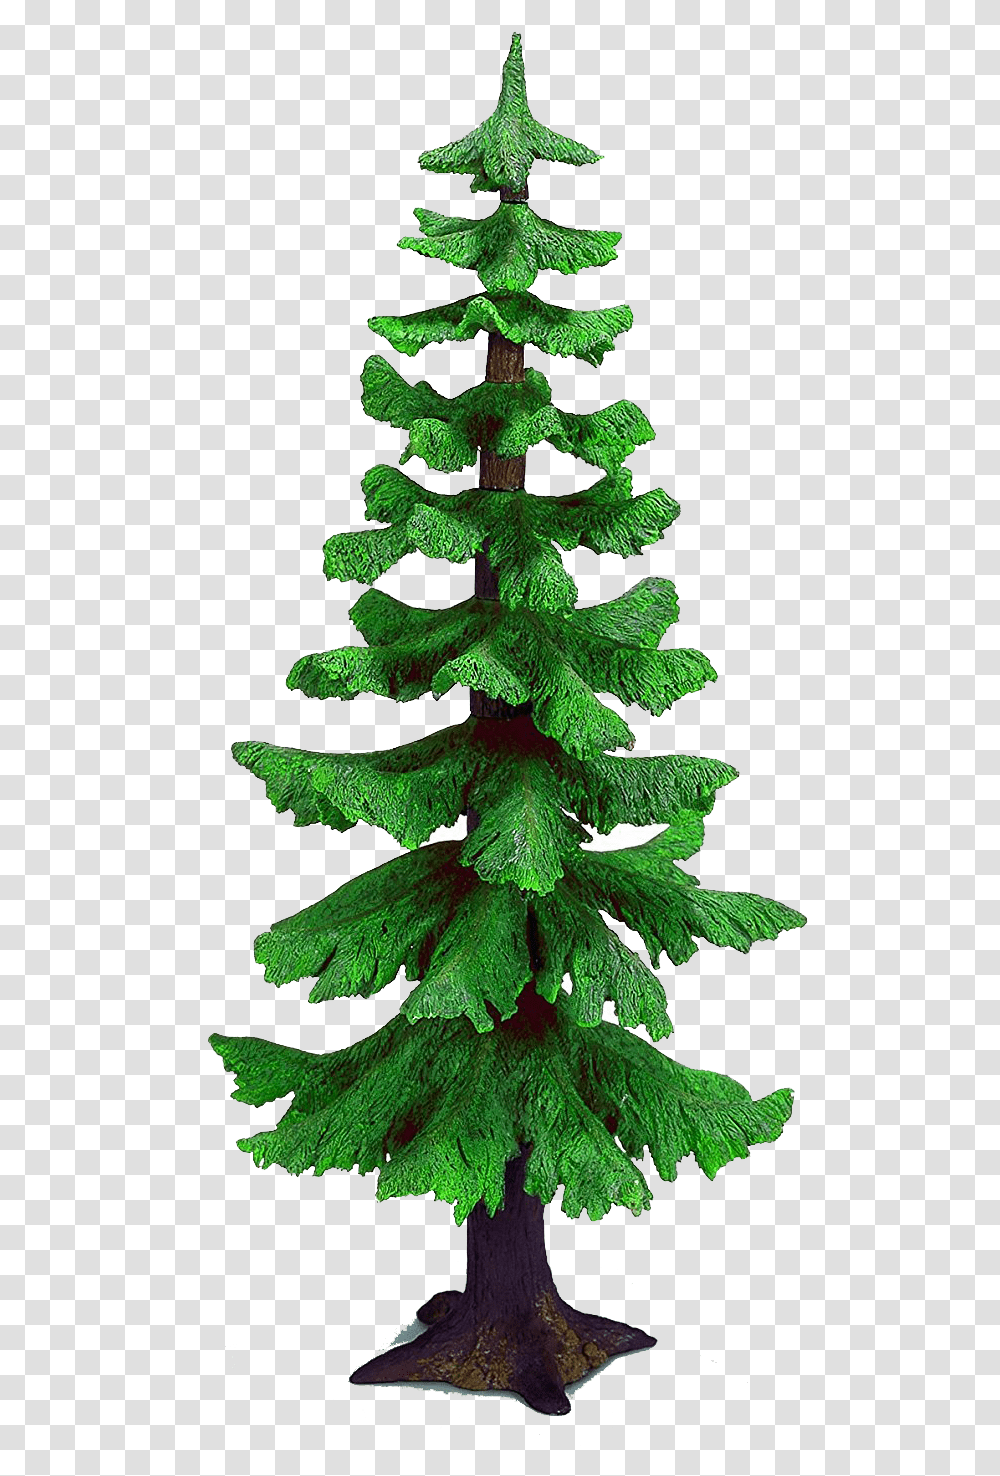 Fir Tree Large Download, Plant, Christmas Tree, Ornament, Pine Transparent Png